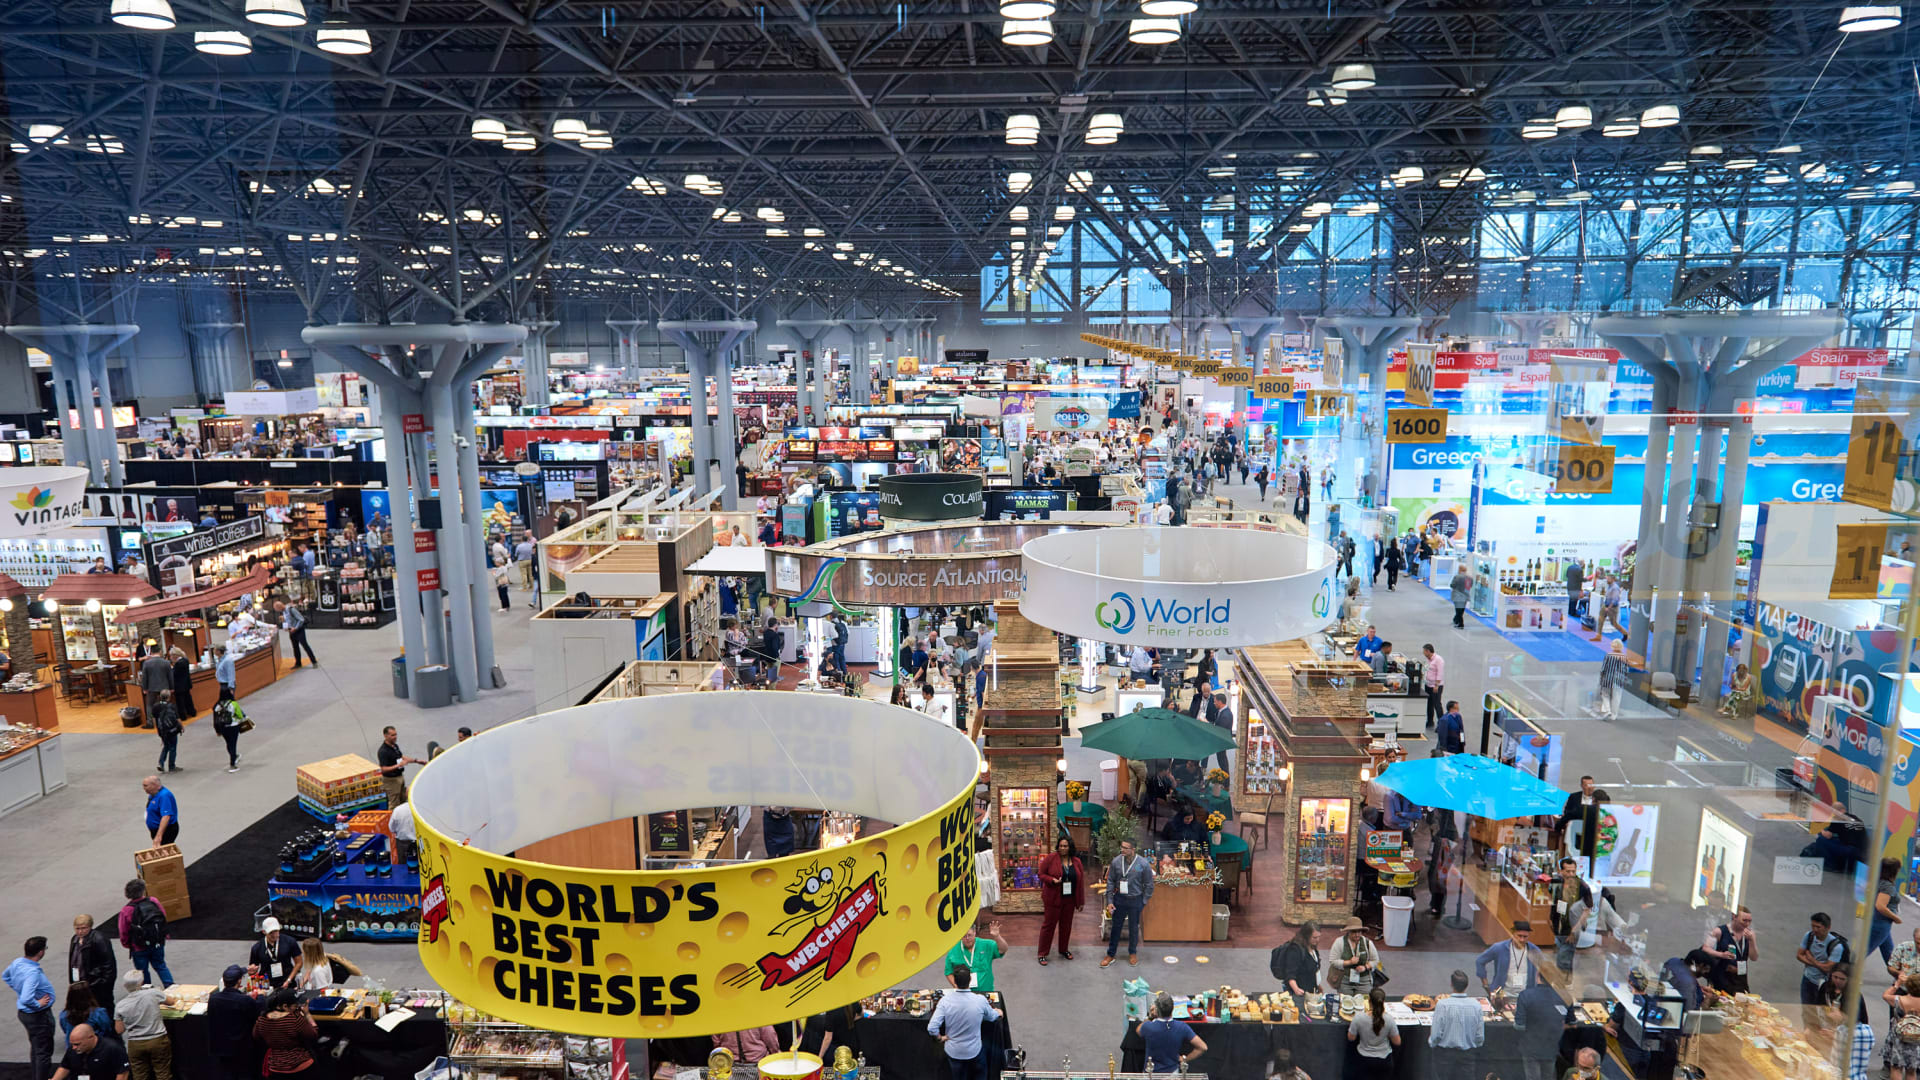 A view of the Summer Fancy Food Show in New York City.